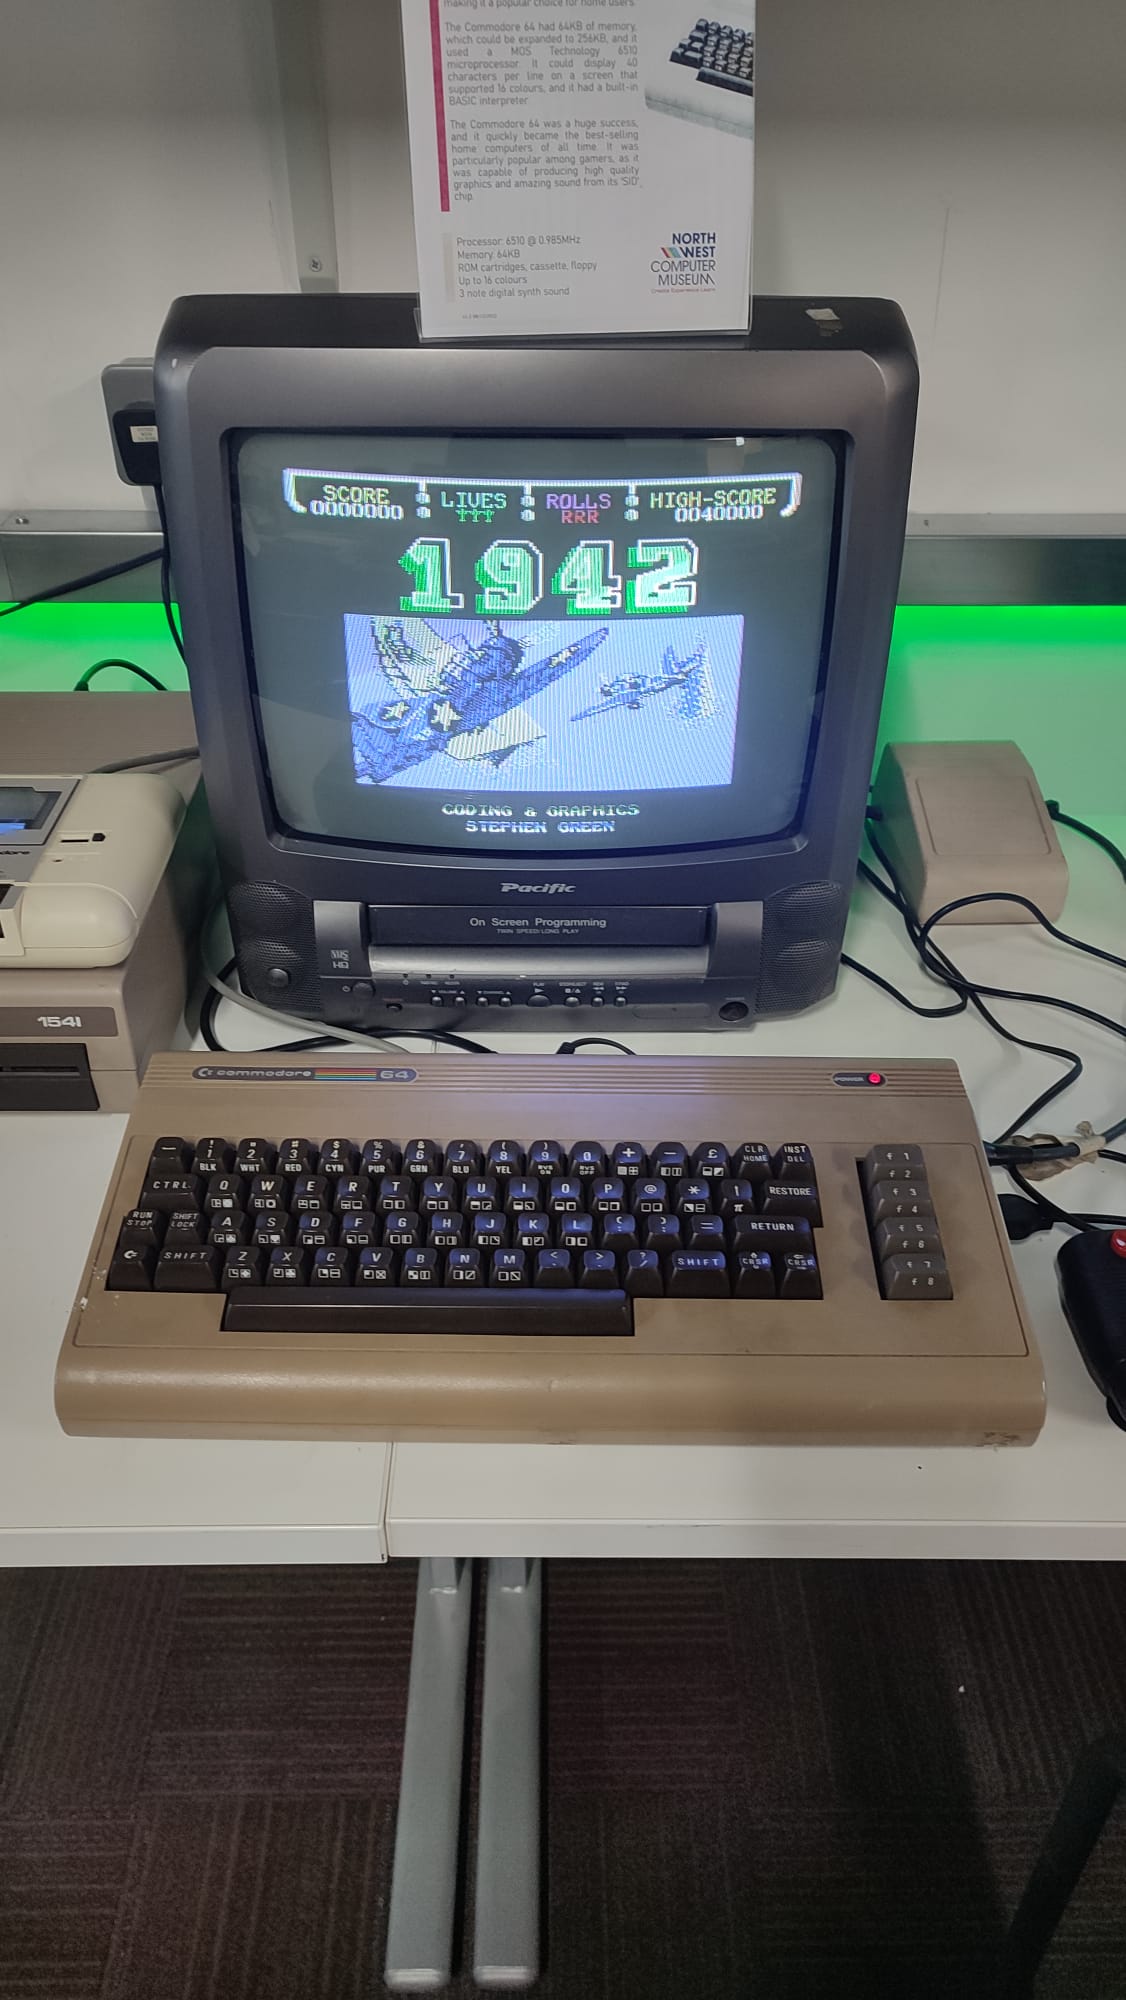 A Commodore 64 with 1942 loaded